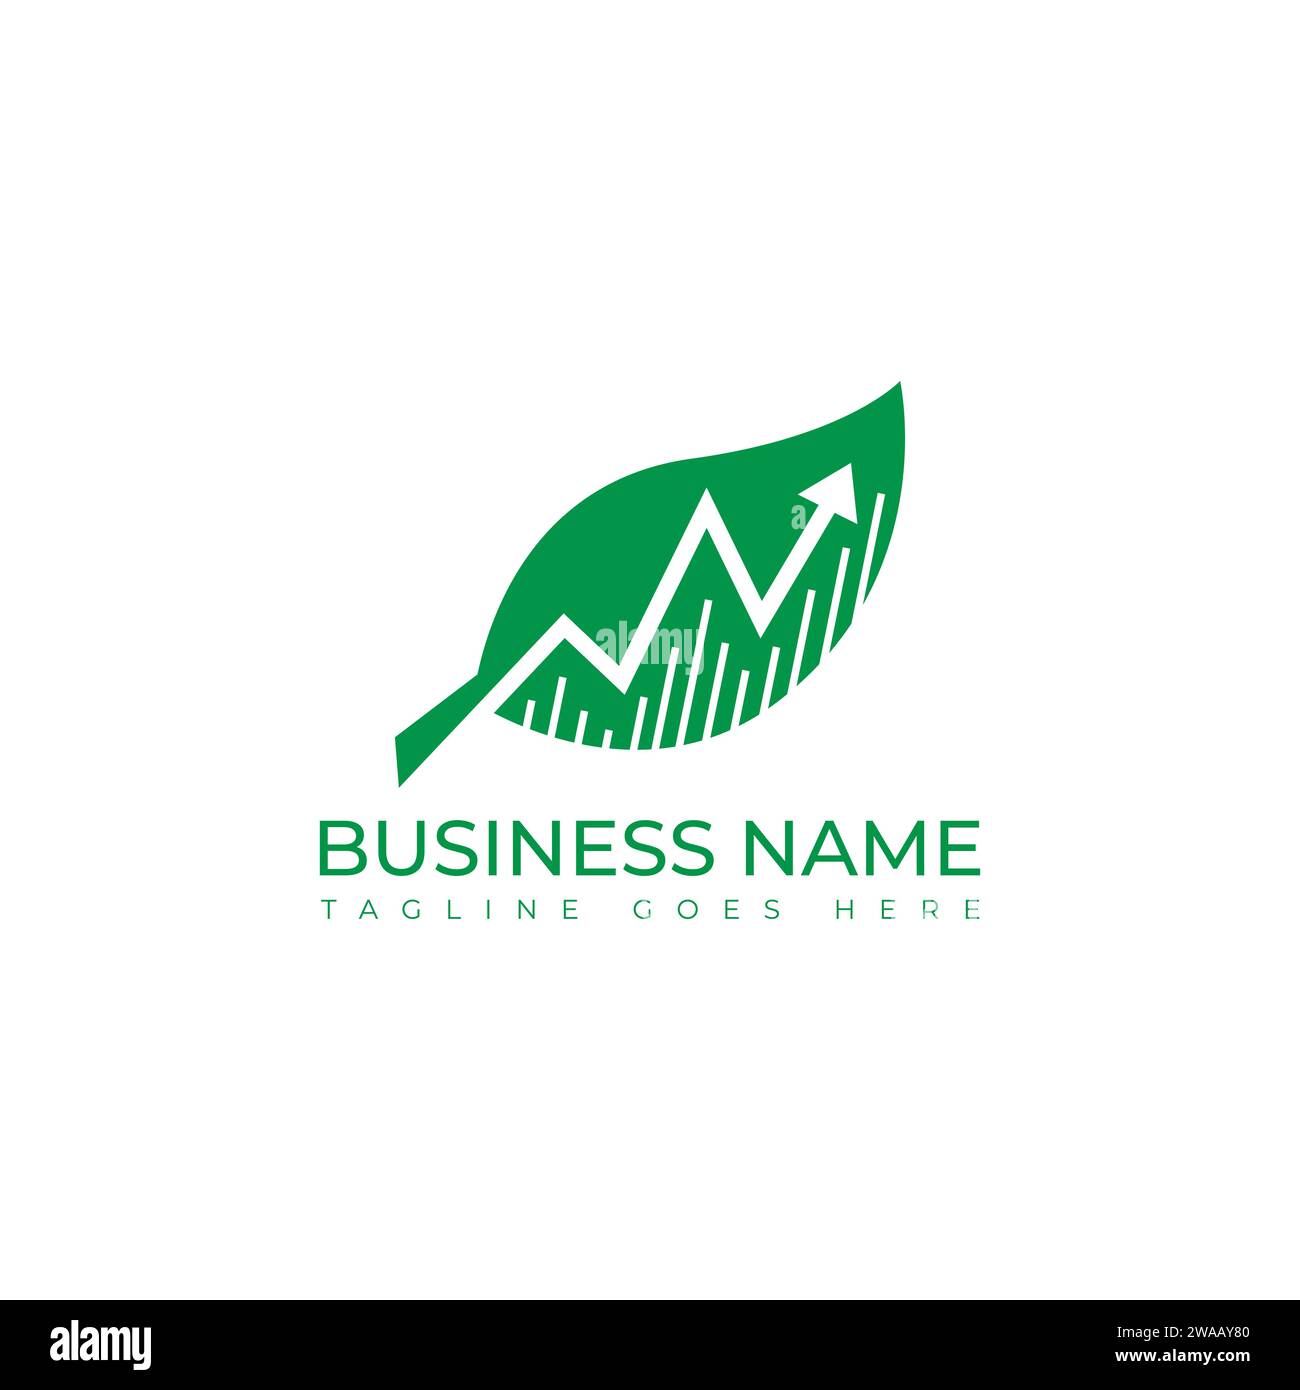 Graphic finance with leaf logo vector image. Eco Green Leaf Investing Business Financial Bar Chart Logo Vector. Business financial logo template leaf Stock Vector